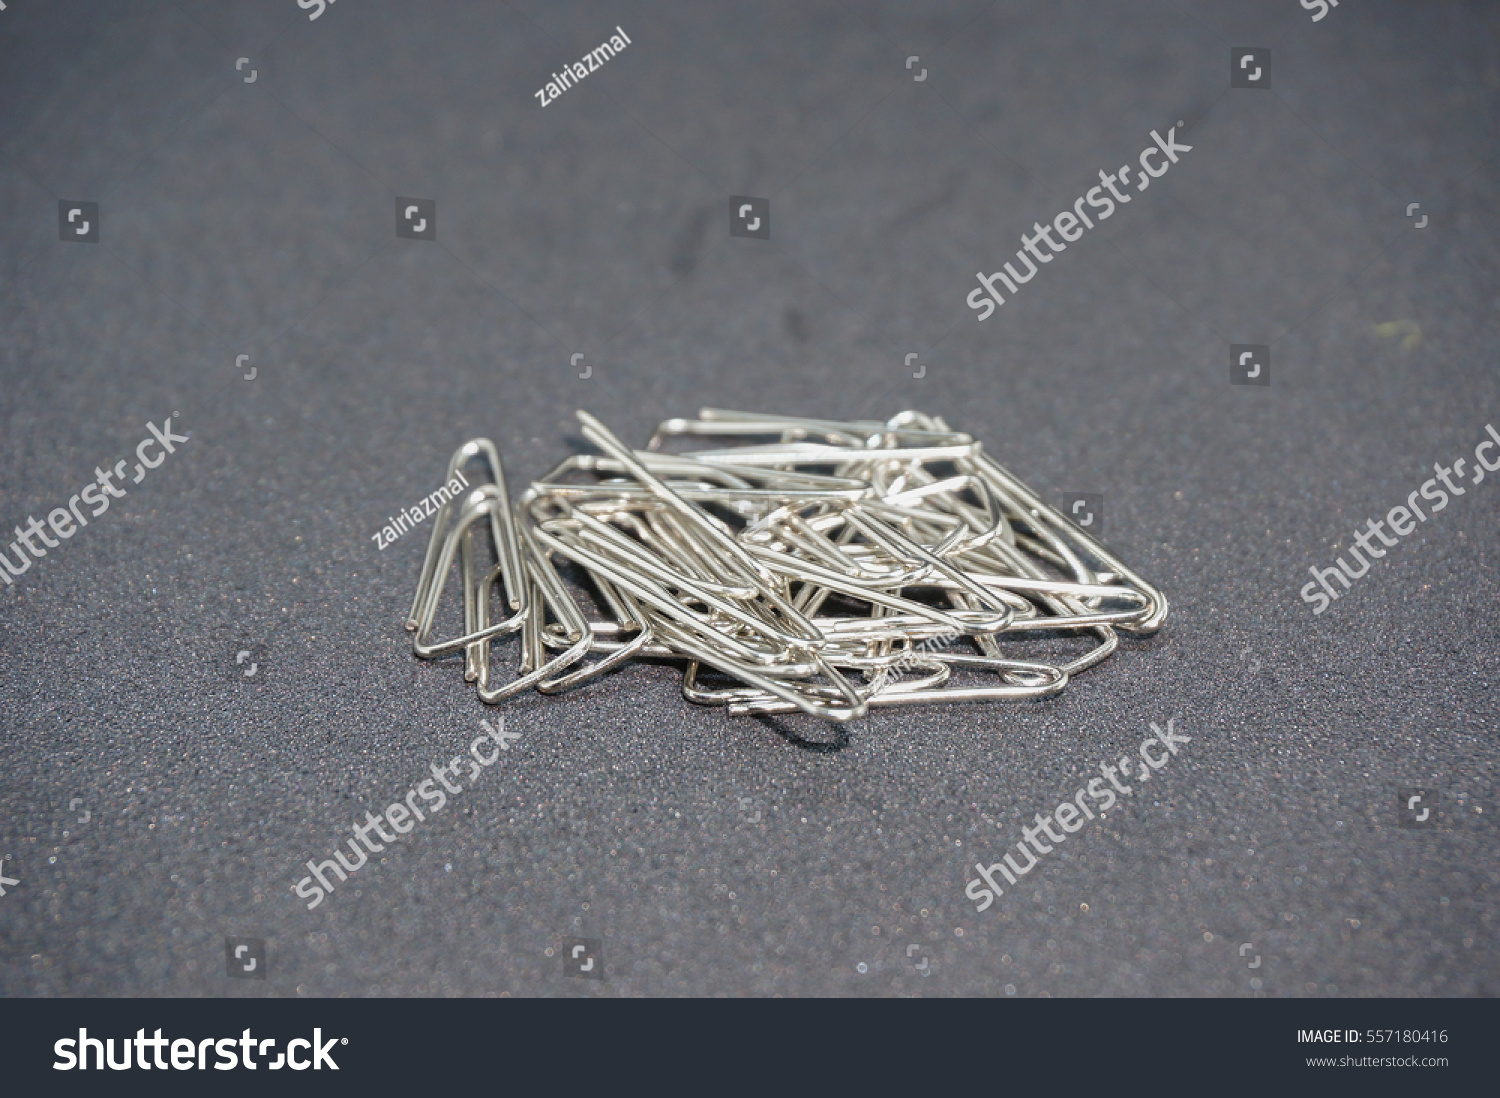 Scattered Paper Clips Isolated On Black Stock Photo 557180416 ...